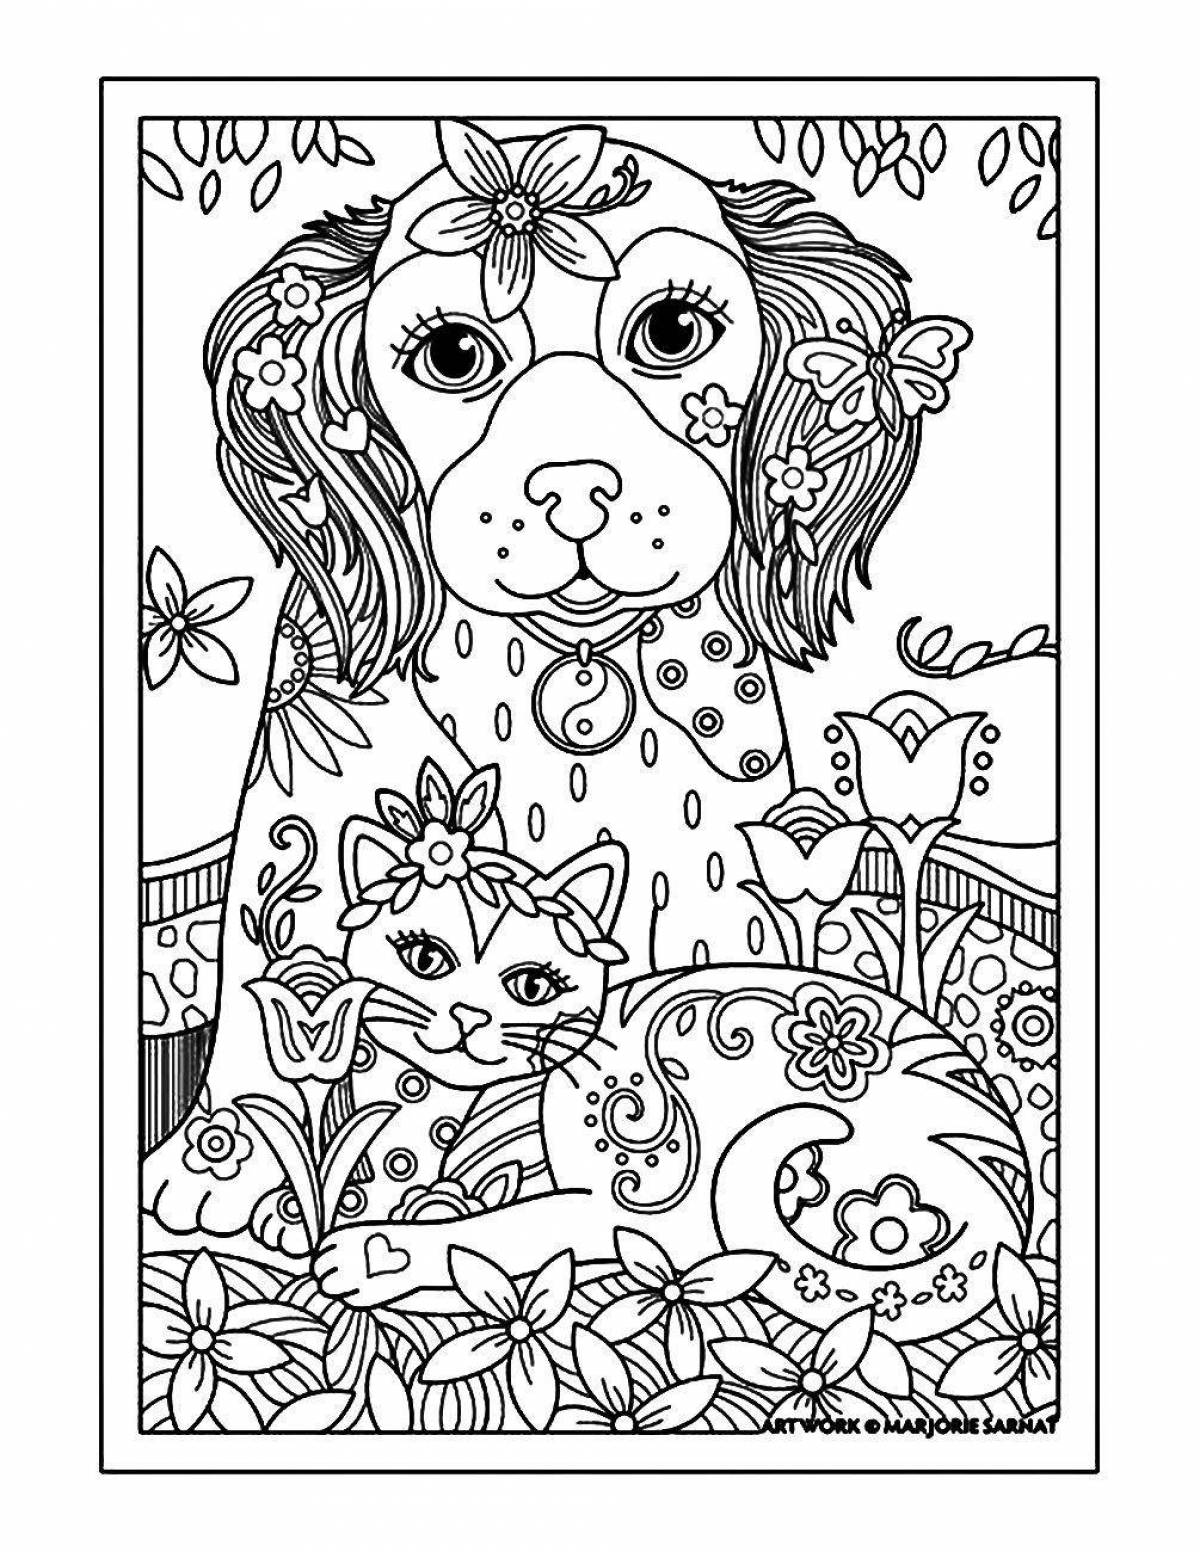 Adorable cute cat and dog coloring page